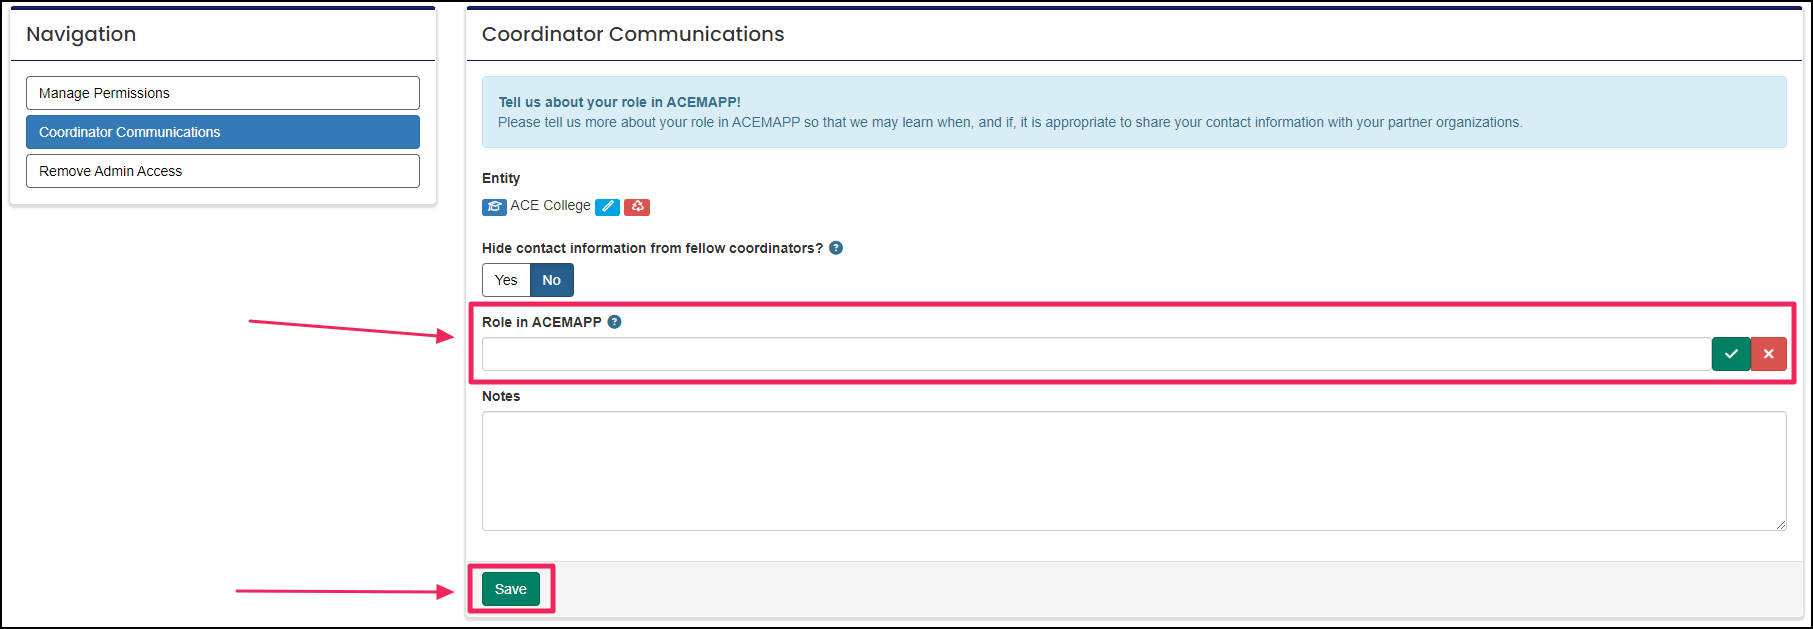 Image shows coordinator communications area highlighting role field and save button.